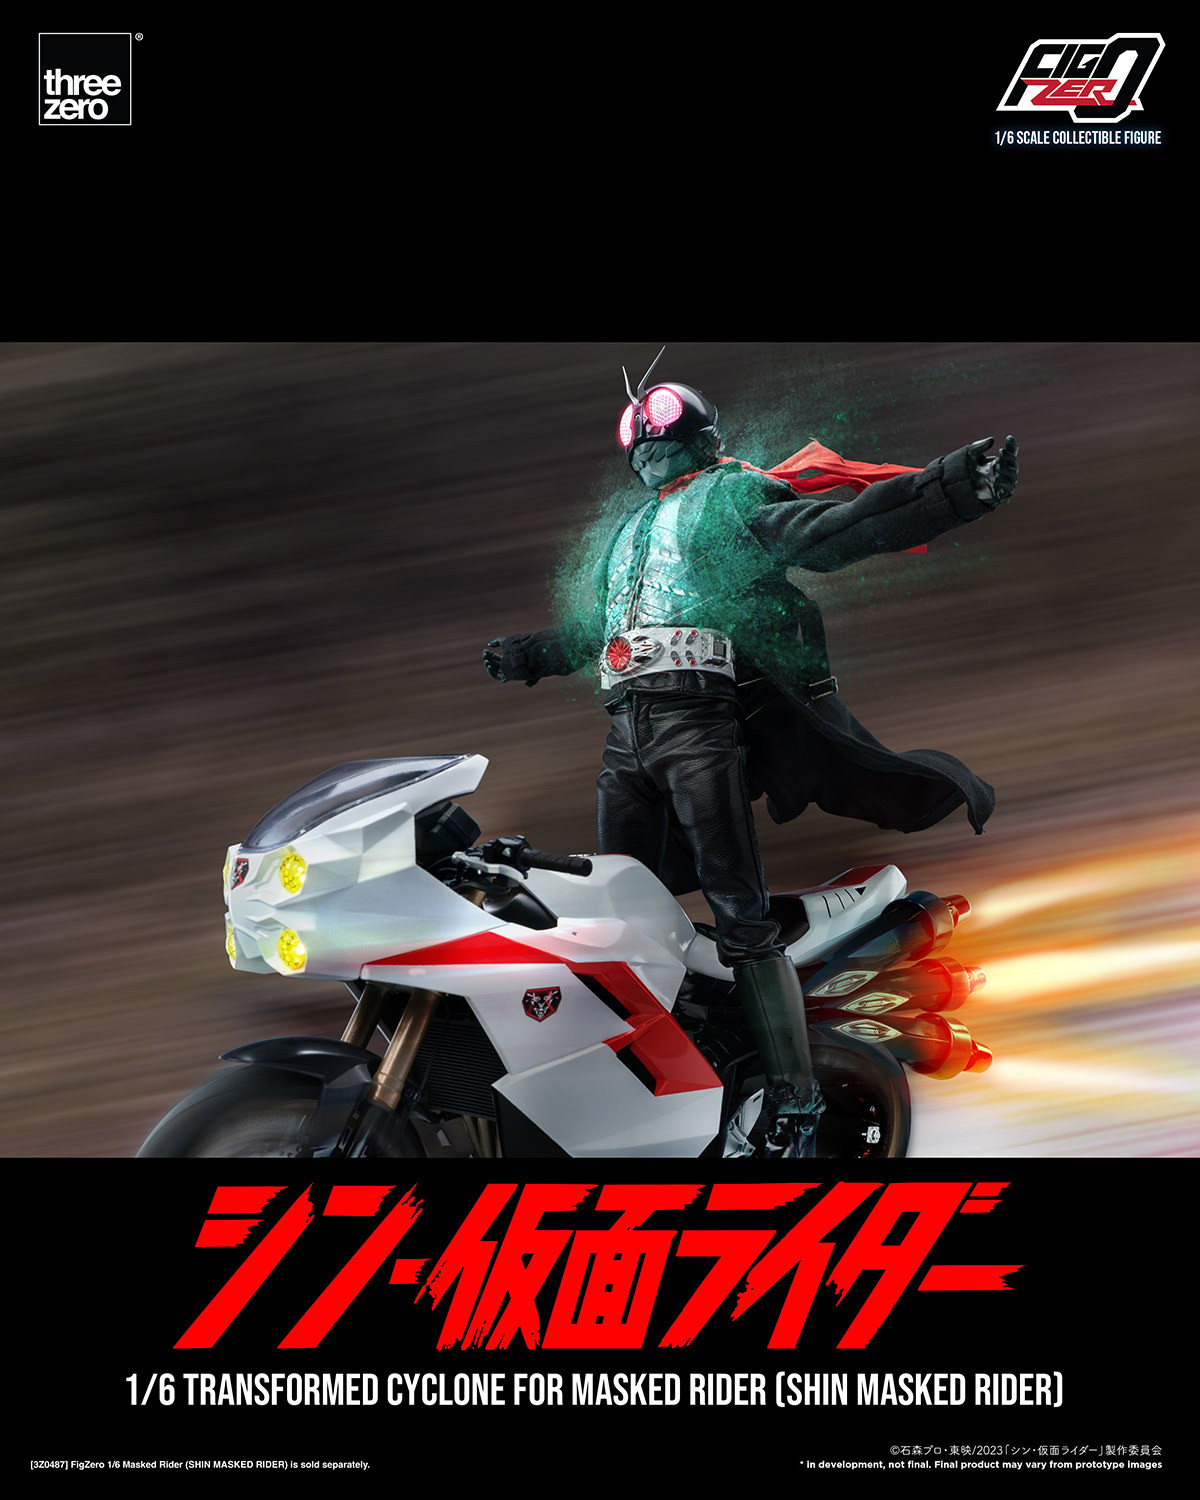 Transformed Cyclone for Masked Rider (Shin Masked Rider) (Prototype Shown) View 16